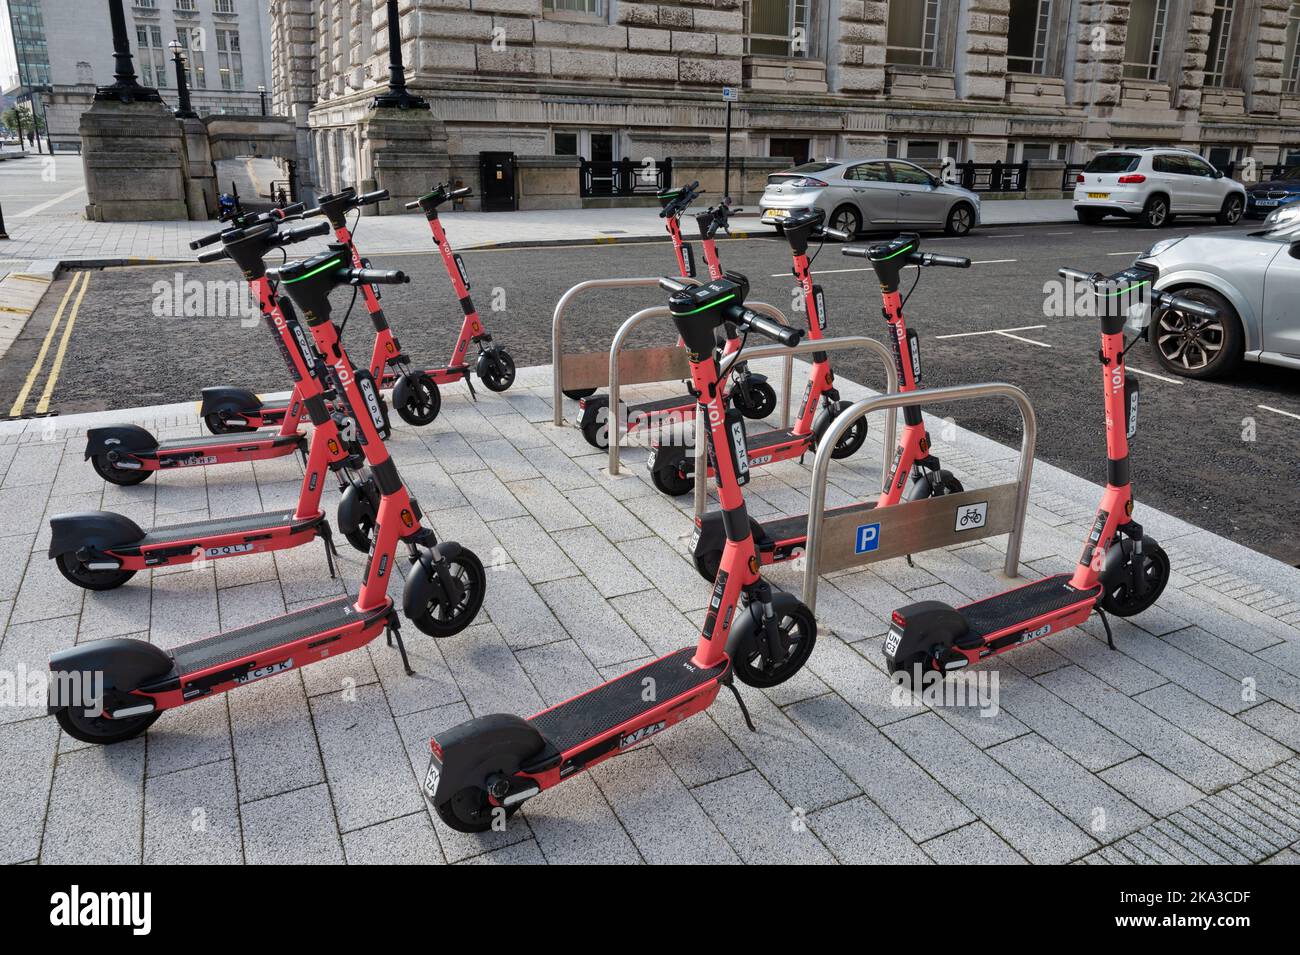 Liverpool, UK- Sept 7, 2022: A group of Voi. electric scooters in Liverpool City Centre Stock Photo